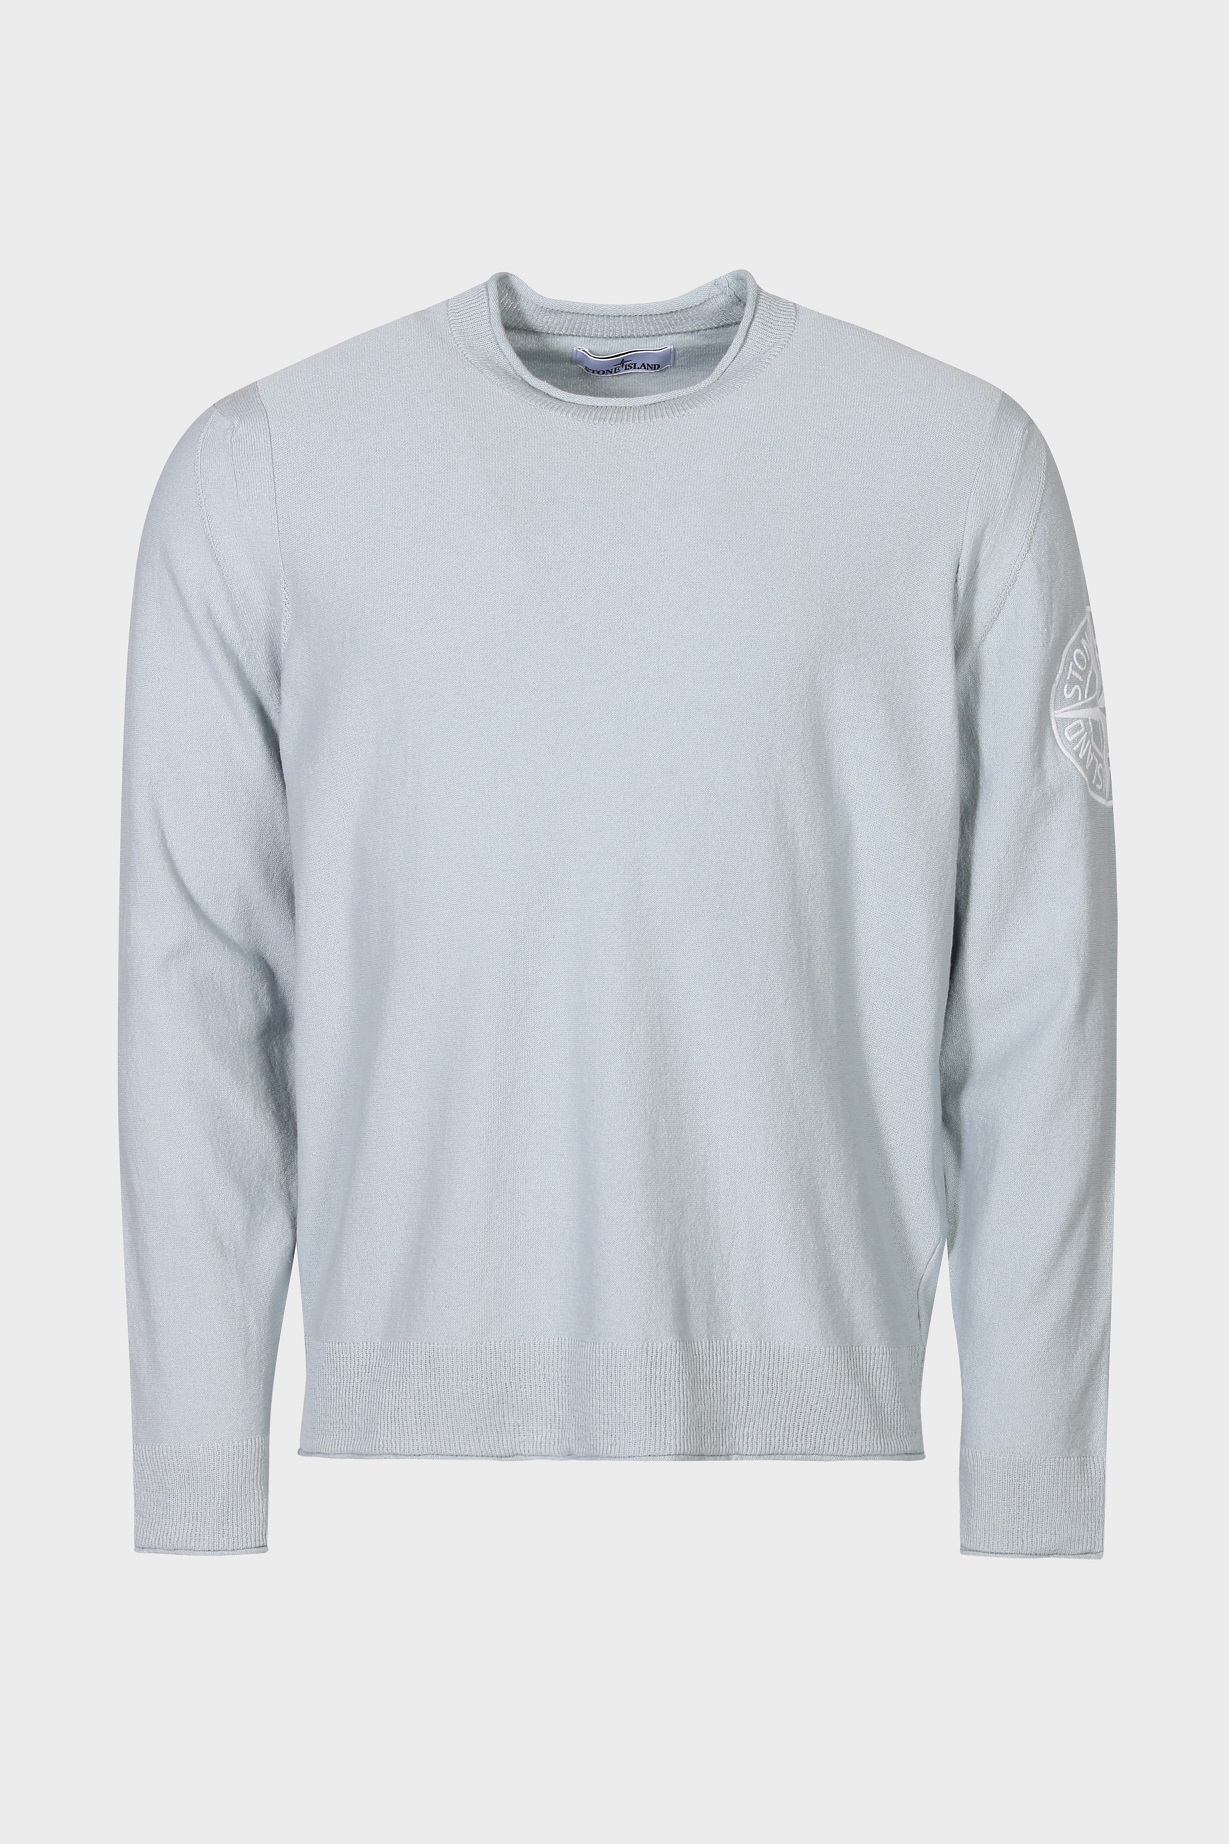 STONE ISLAND Cotton Knit Pullover in Sky Blue